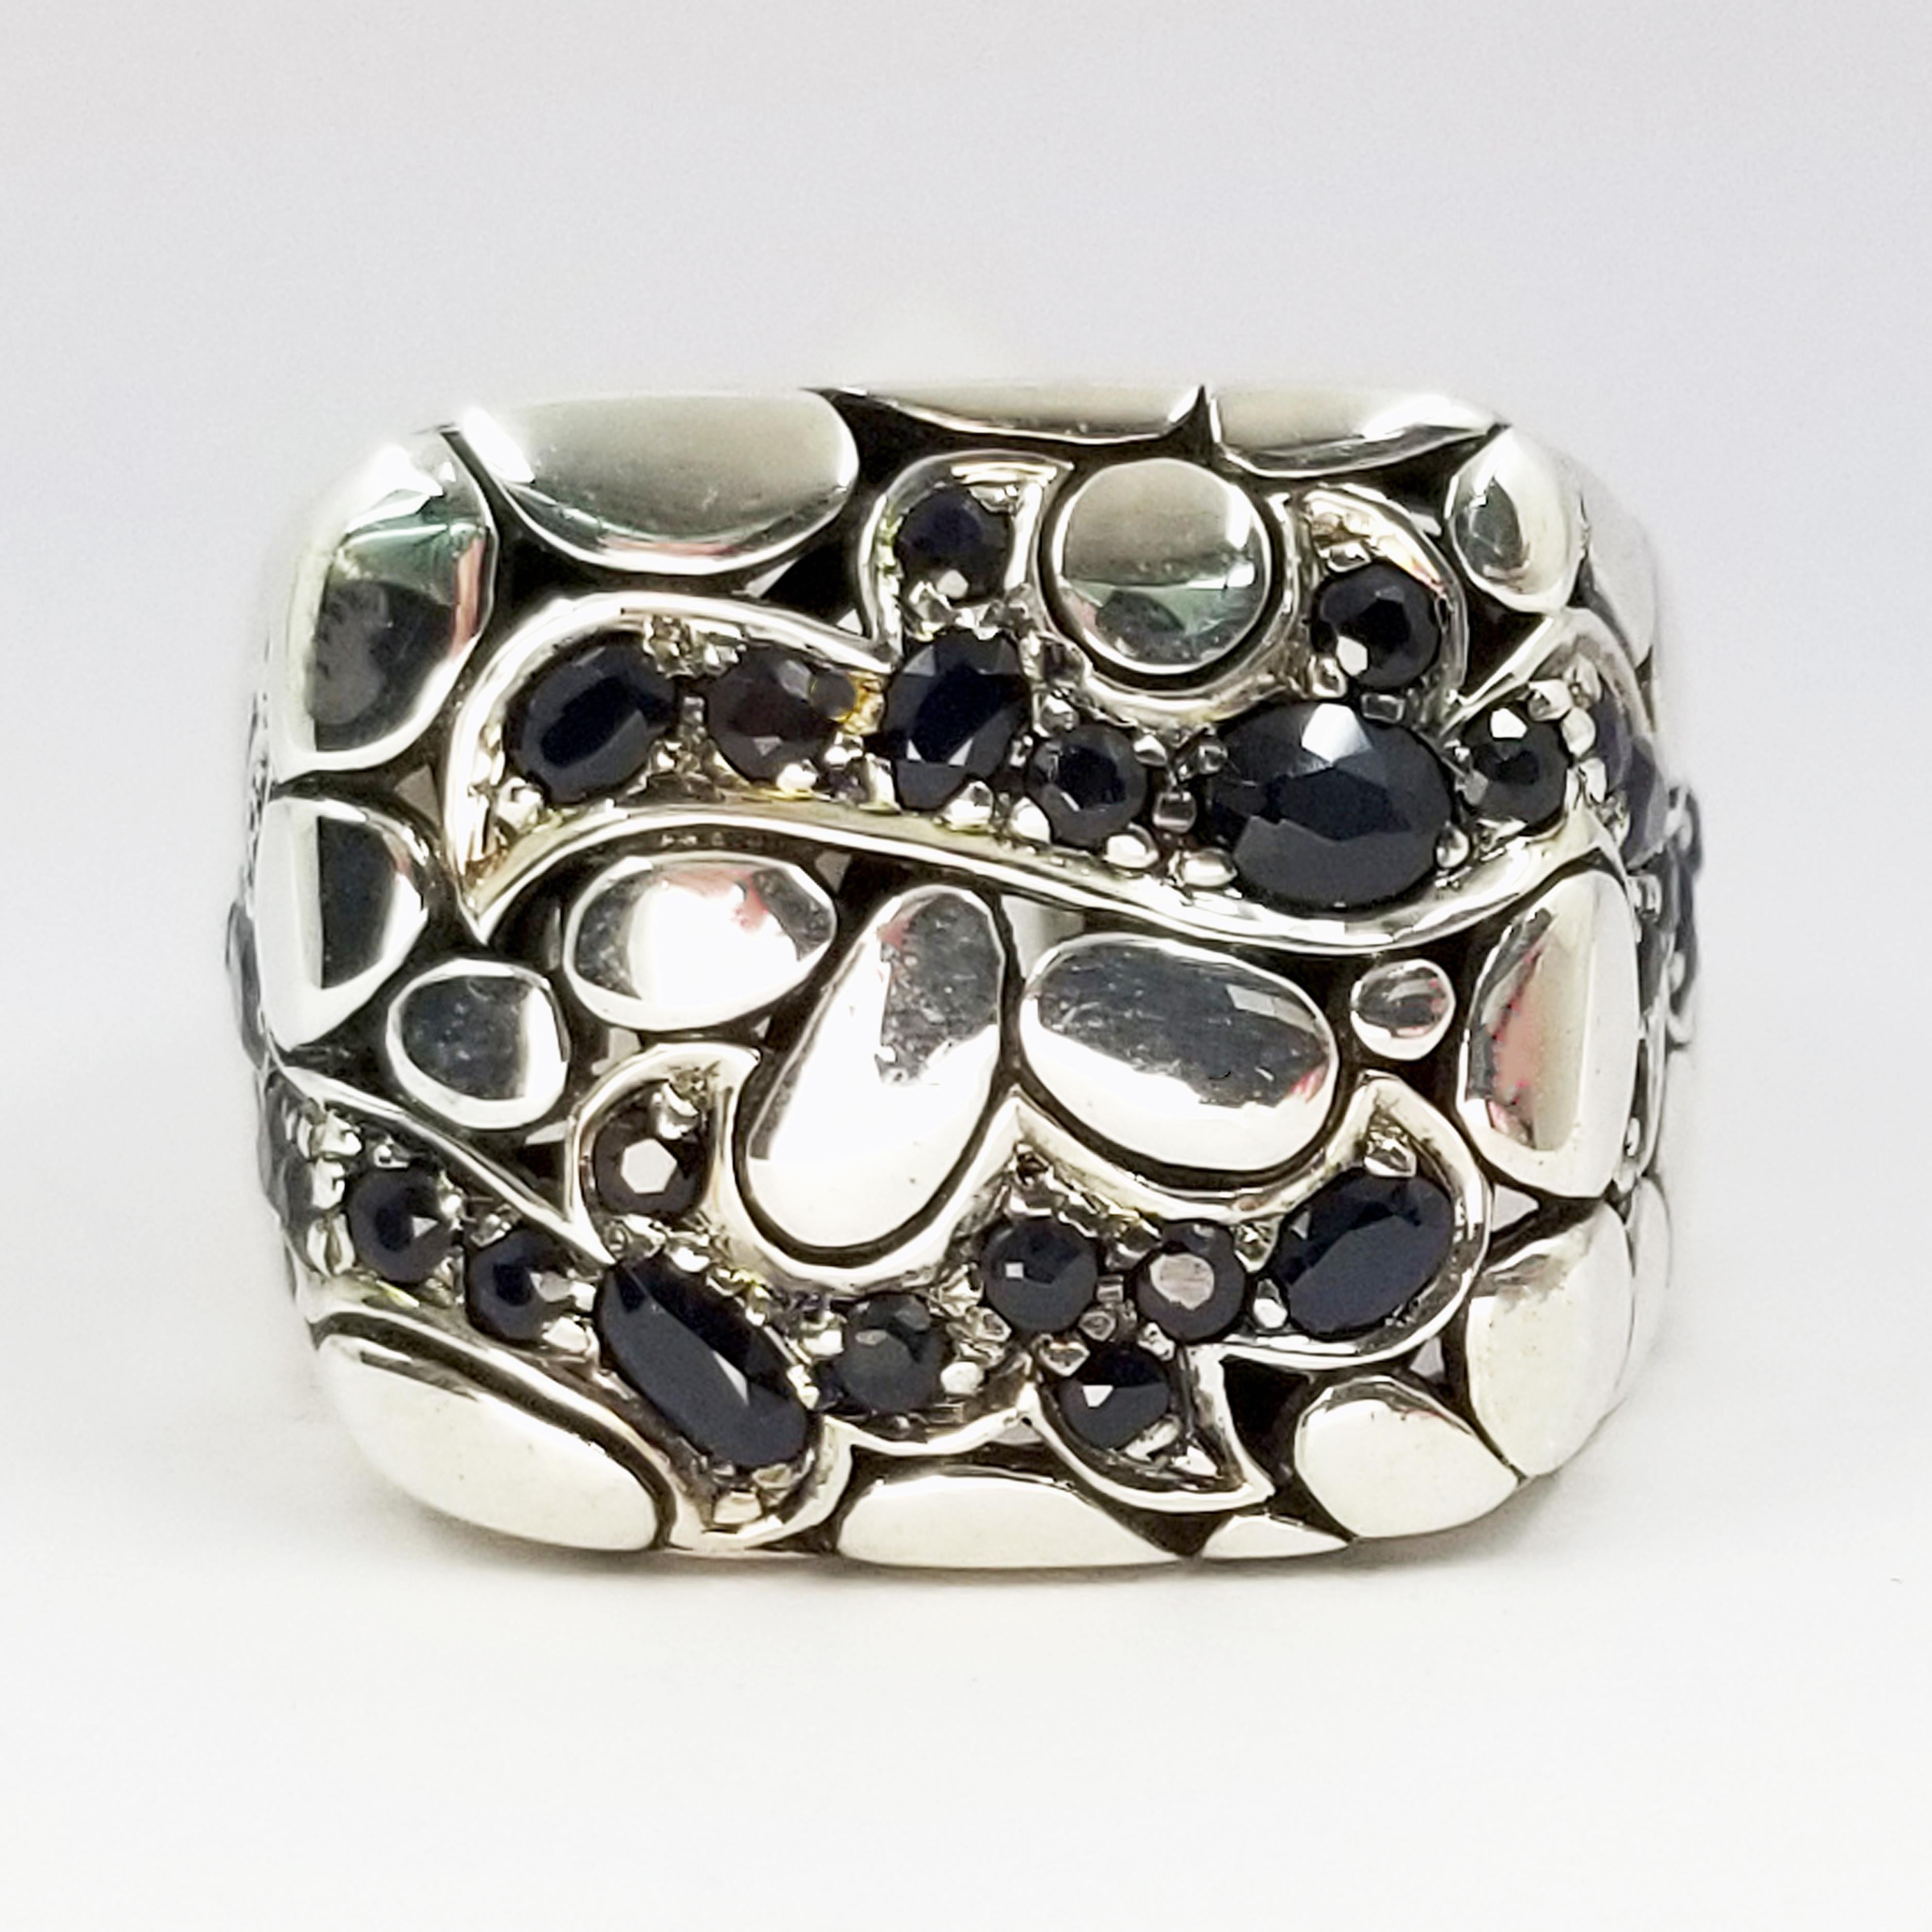 This sterling silver ring is hand assembled in Bali by the craftsmen at John Hardy. It is from the men's Dayak jewelry collection, and features multiple prong-set faceted black sapphires on the top and sides. The interior gallery is designed with a